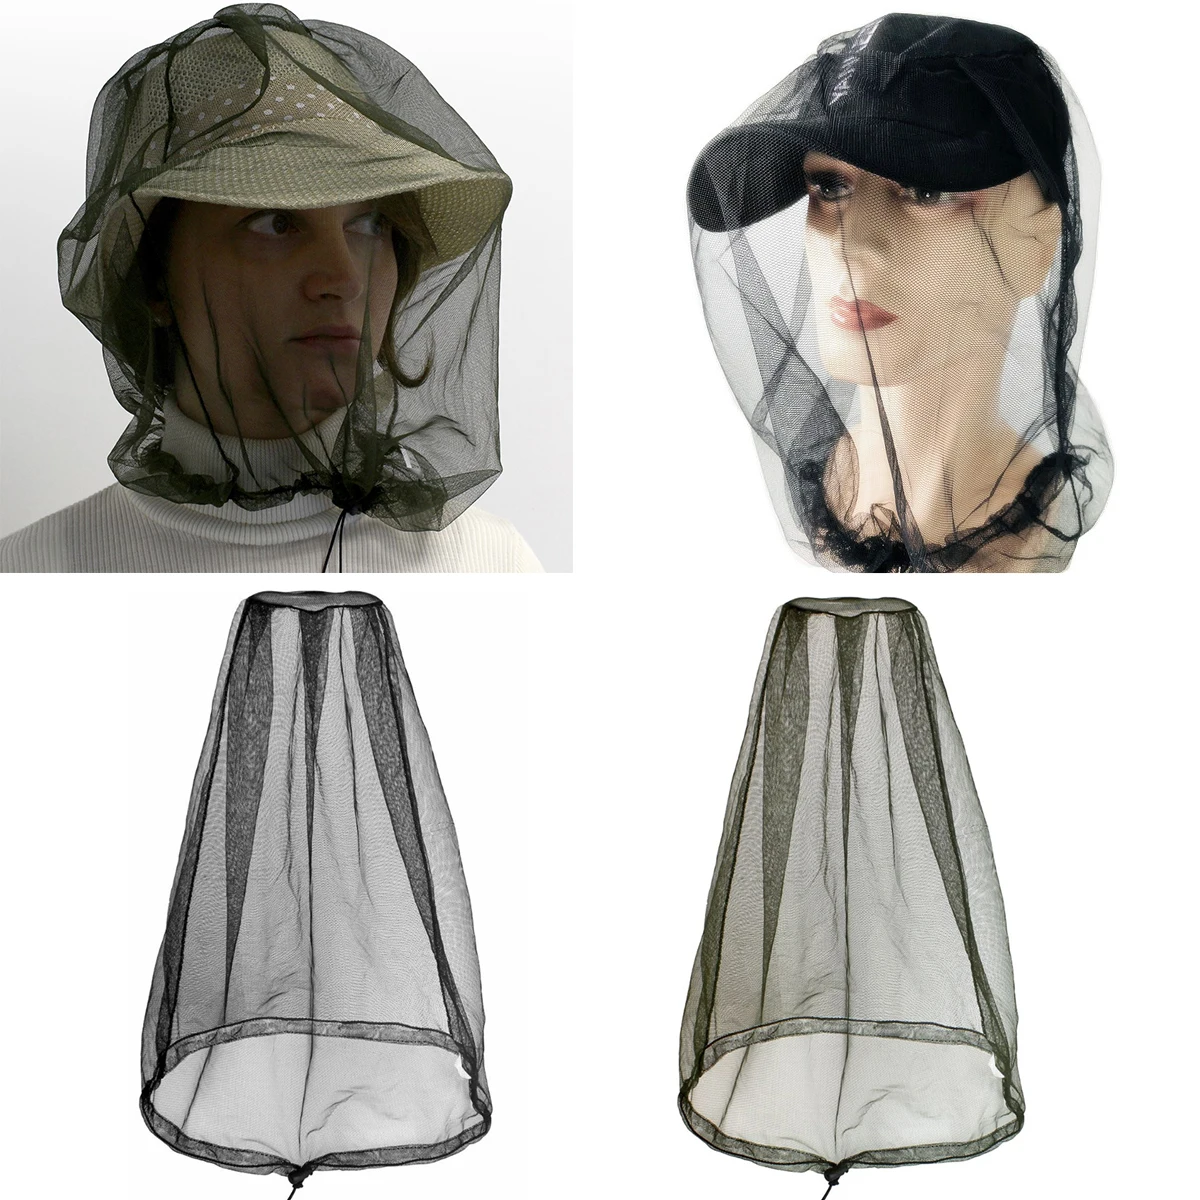 Unisex Midge Bug Camping Protector Hat Face Mesh Anti Mosquito Head Cover Insect Outdoor Travel Mosquito Net